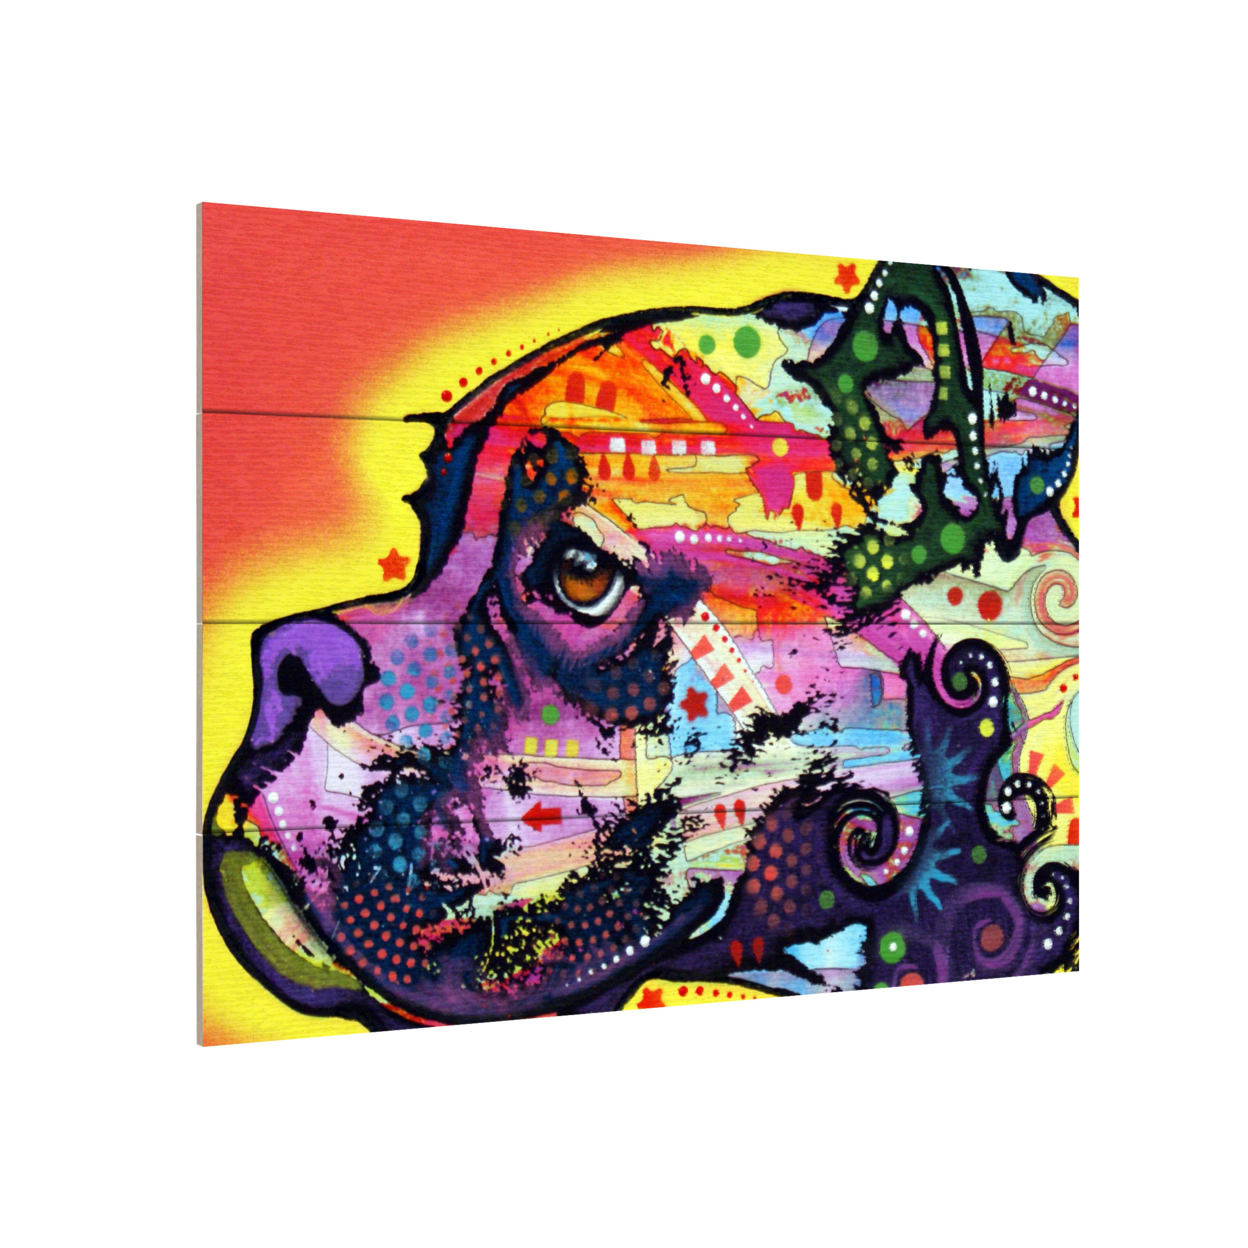 Wall Art 12 X 16 Inches Titled Profile Boxer Ready To Hang Printed On Wooden Planks